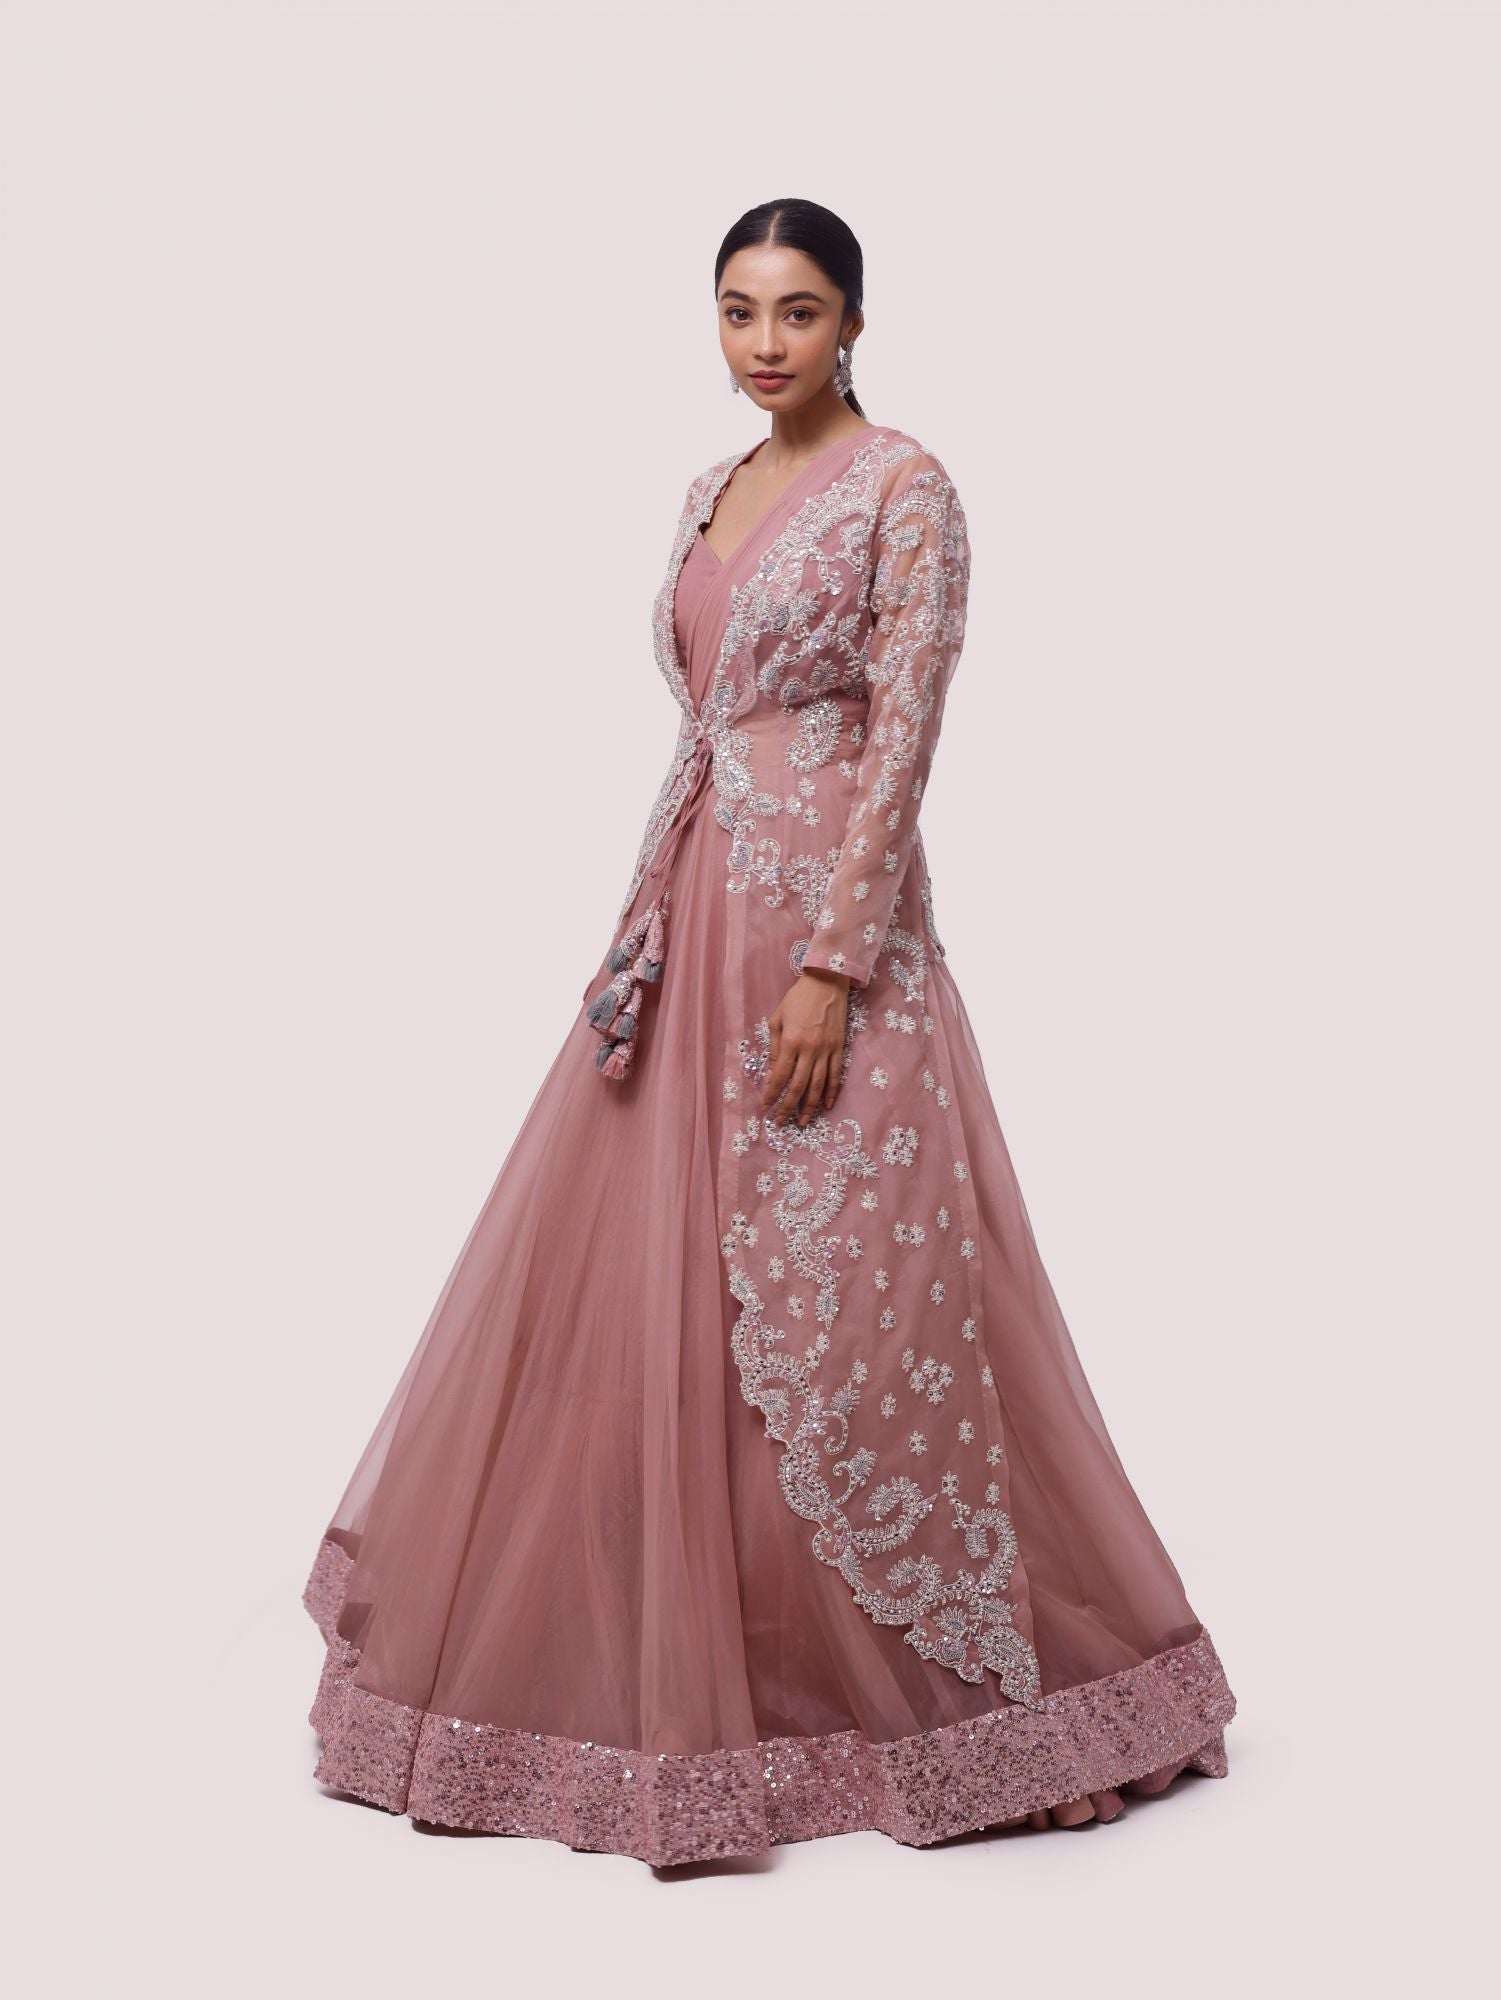 Buy beautiful dusty rose pink organza saree gown online in USA. Shop the best and latest designs in embroidered sarees, designer sarees, Anarkali suit, lehengas, sharara suits for weddings and special occasions from Pure Elegance Indian fashion store in USA.-gown